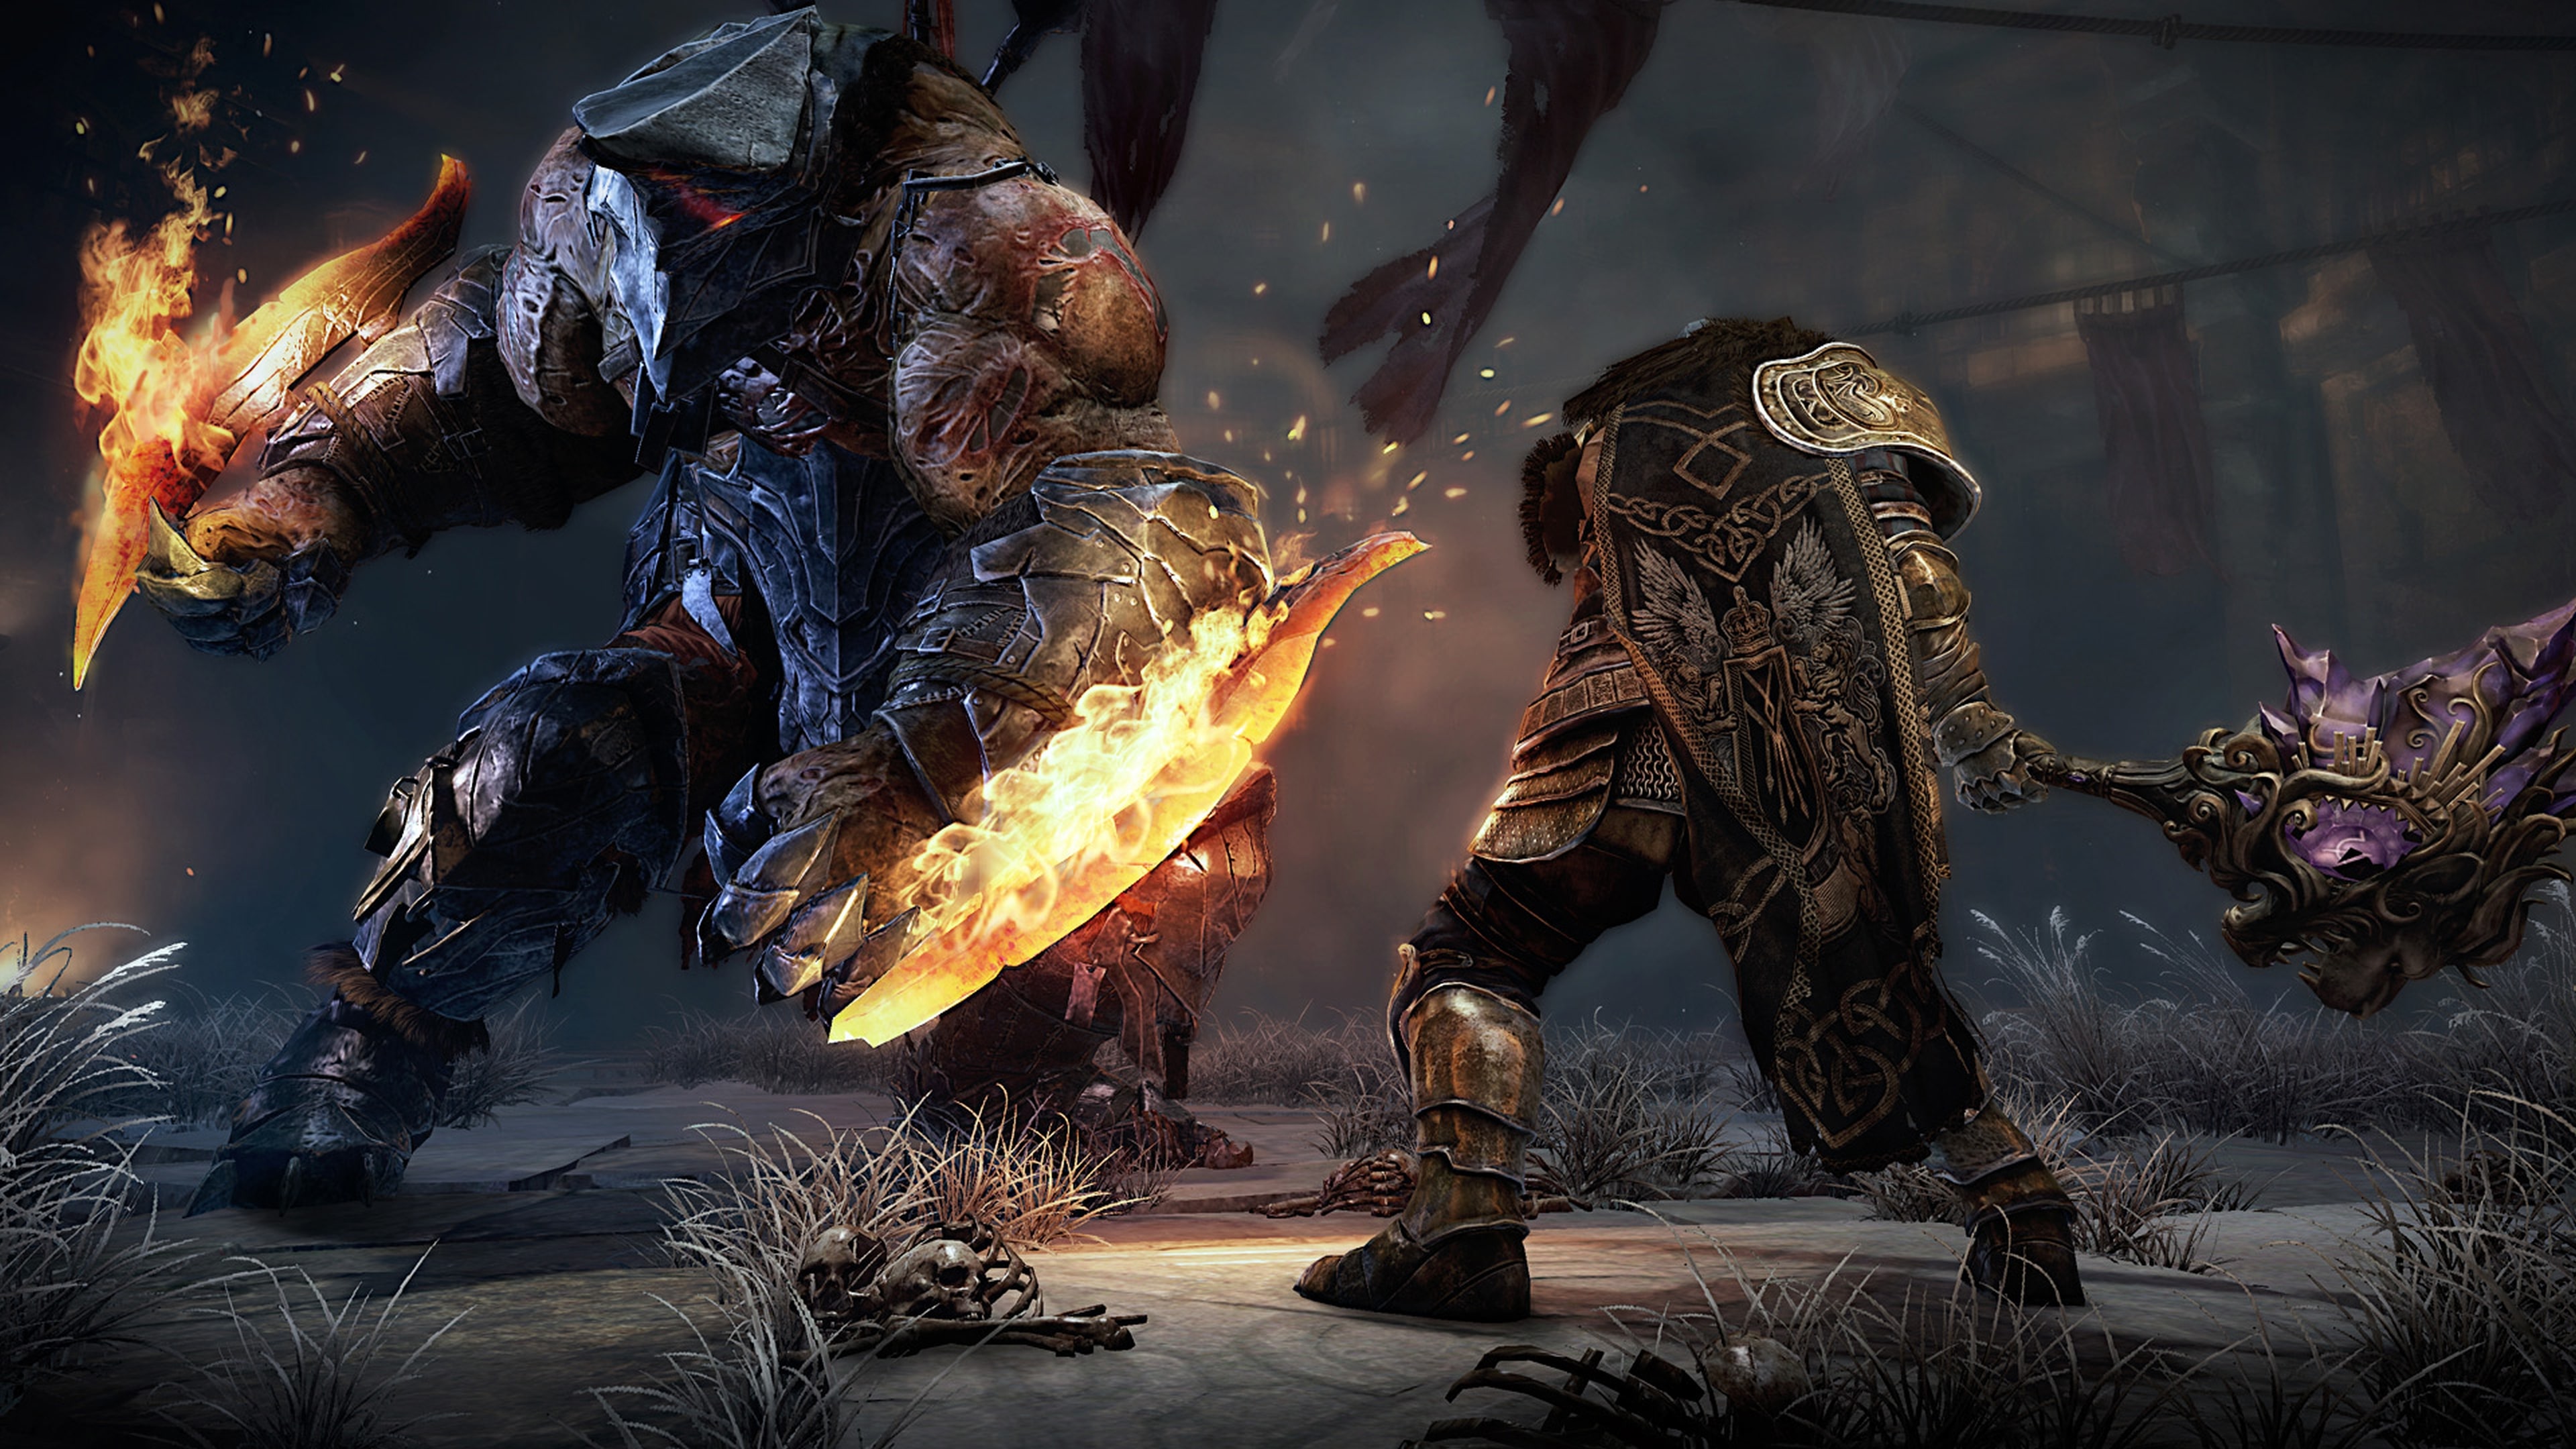 lords of the fallen psn